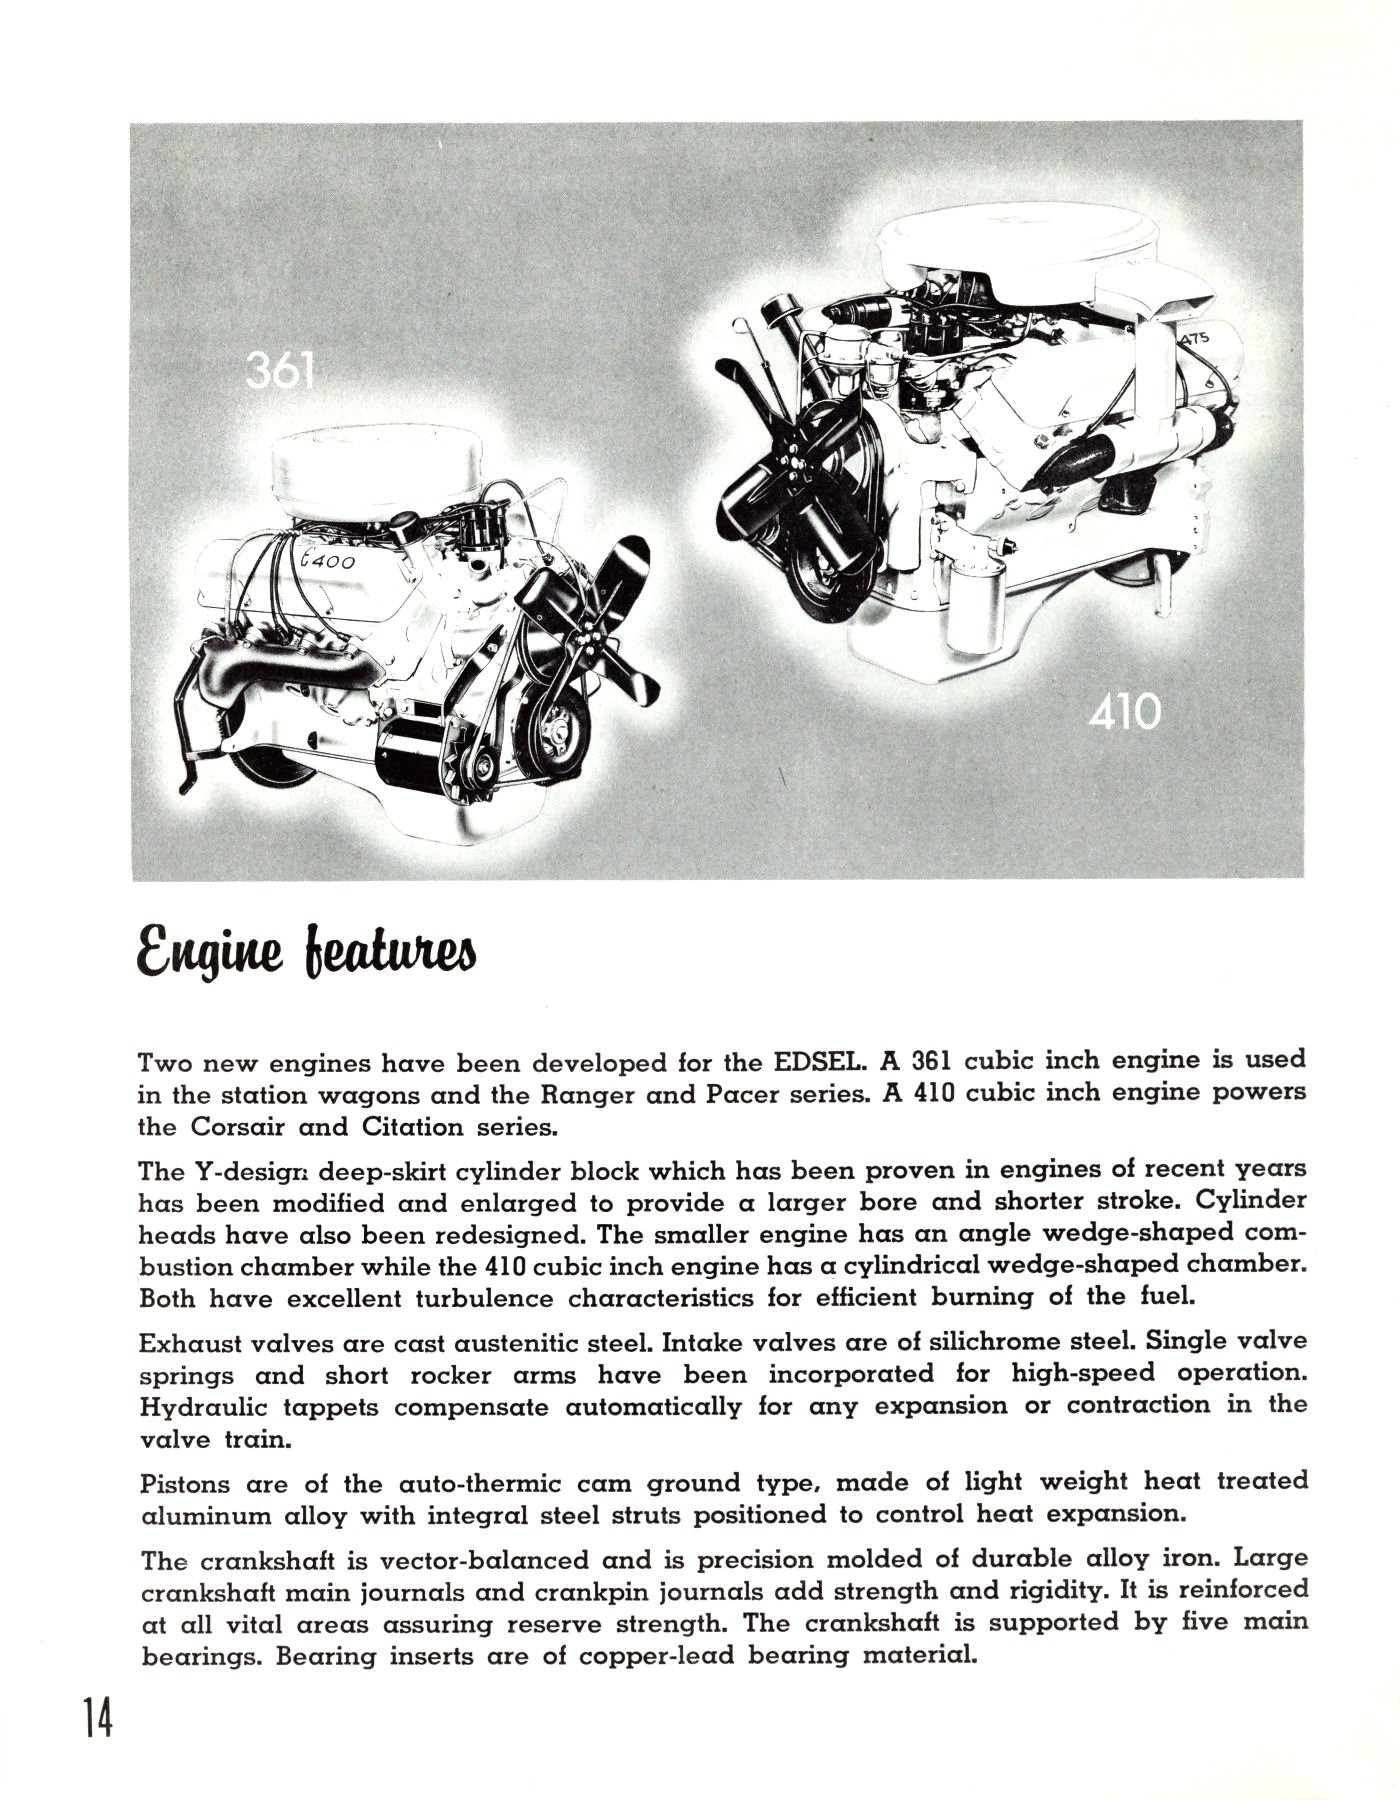 1958 Edsel Features-14